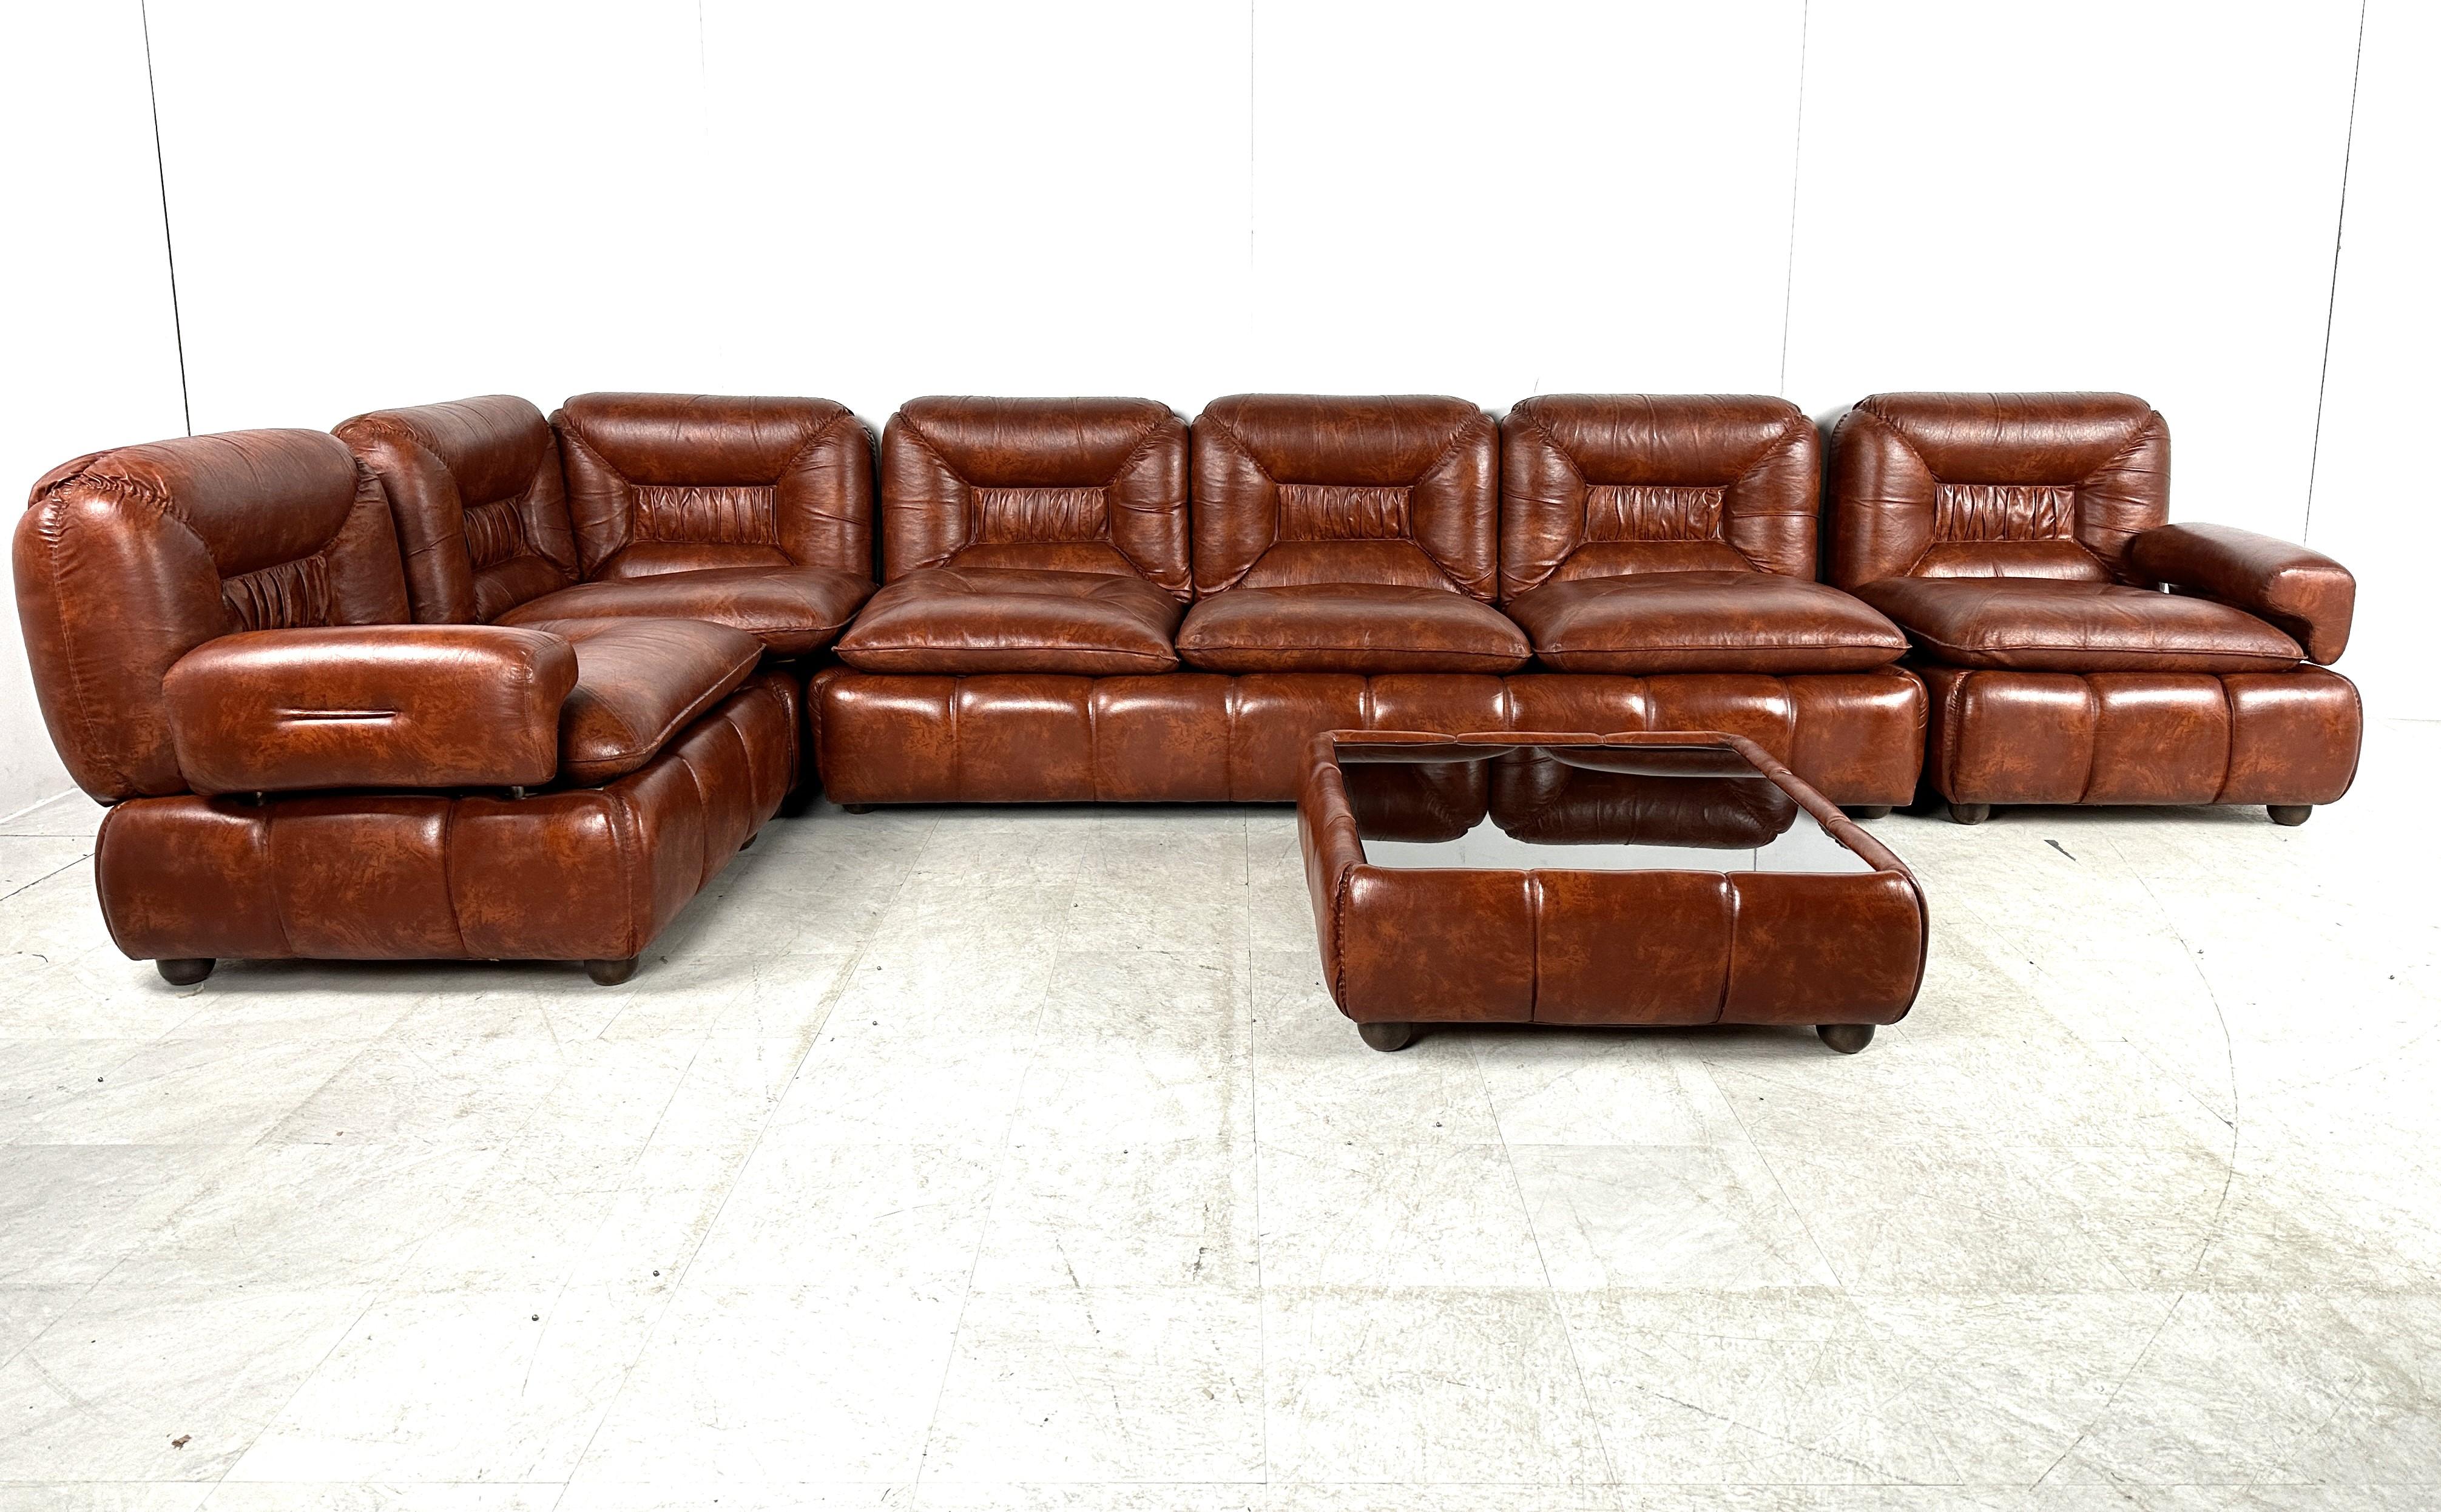 Seventies design sofa set made from simili leather with beautiful flamed pattern.

Comes with a coffee table.

The armrests are interchangeable so you can create your own setup (L shaped, one long sofa,..)

Very comfortable sofa set with a beautiful